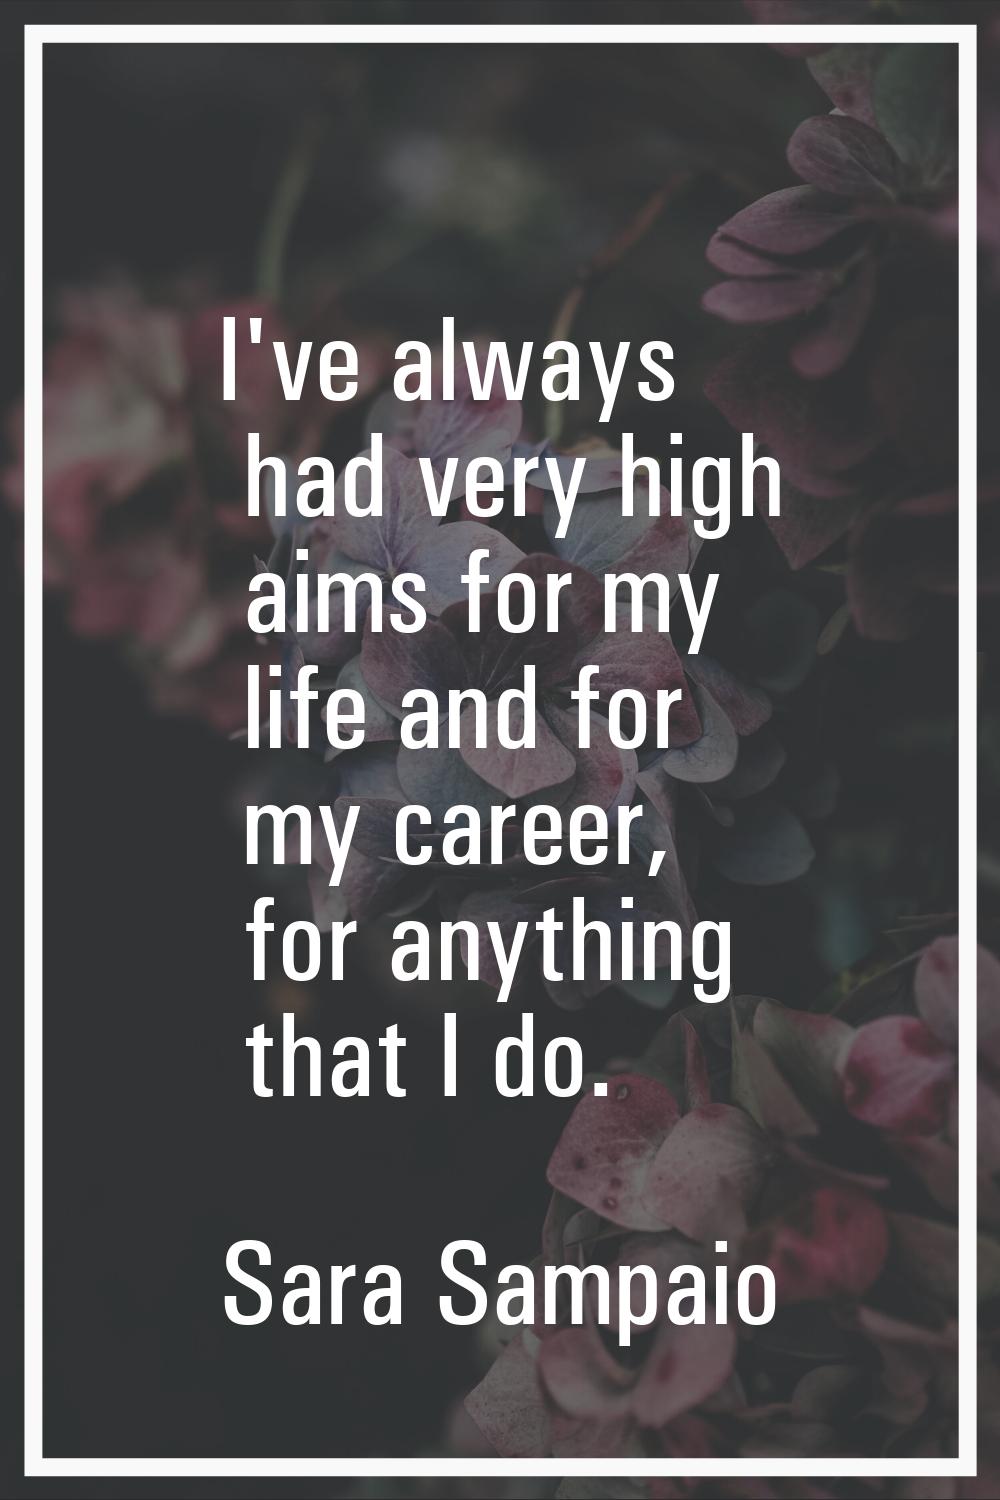 I've always had very high aims for my life and for my career, for anything that I do.